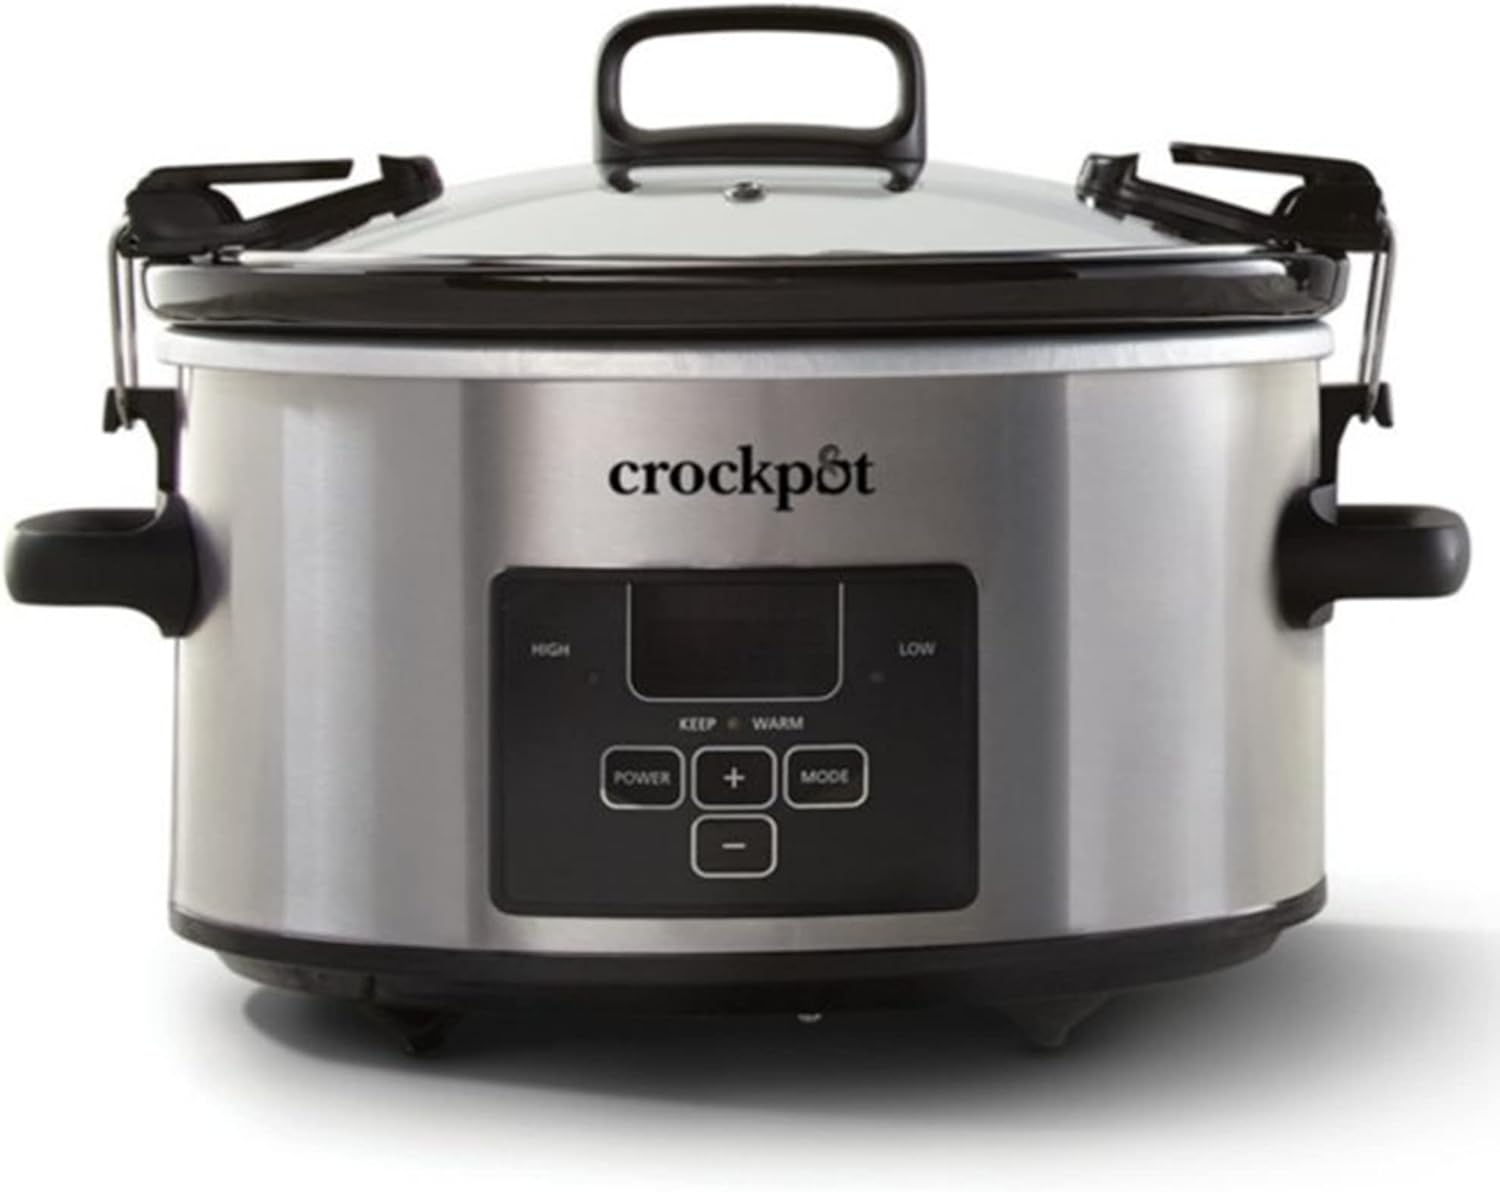 Crock-Pot 4 Quart Travel Proof Cook and Carry Programmable Slow Cooker with Locking Lid, Convenient Handles, and Digital Display, Stainless Steel